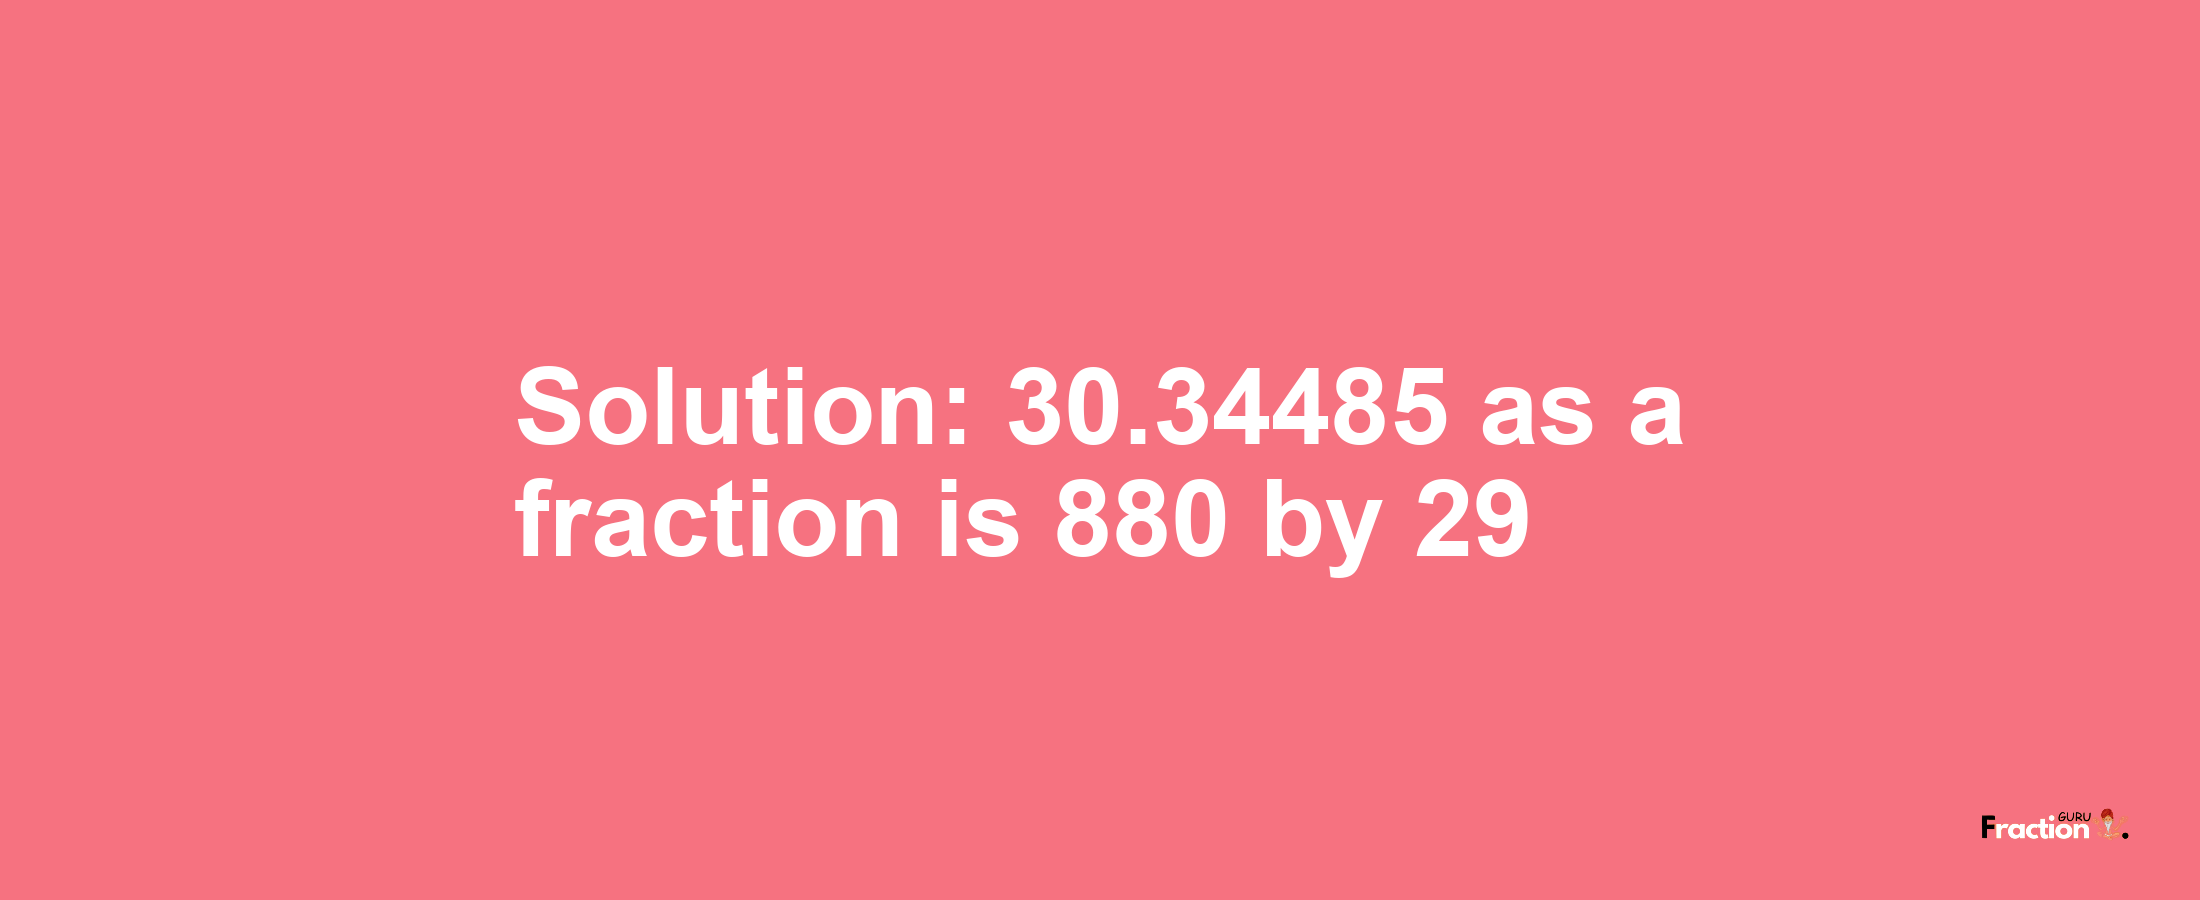 Solution:30.34485 as a fraction is 880/29